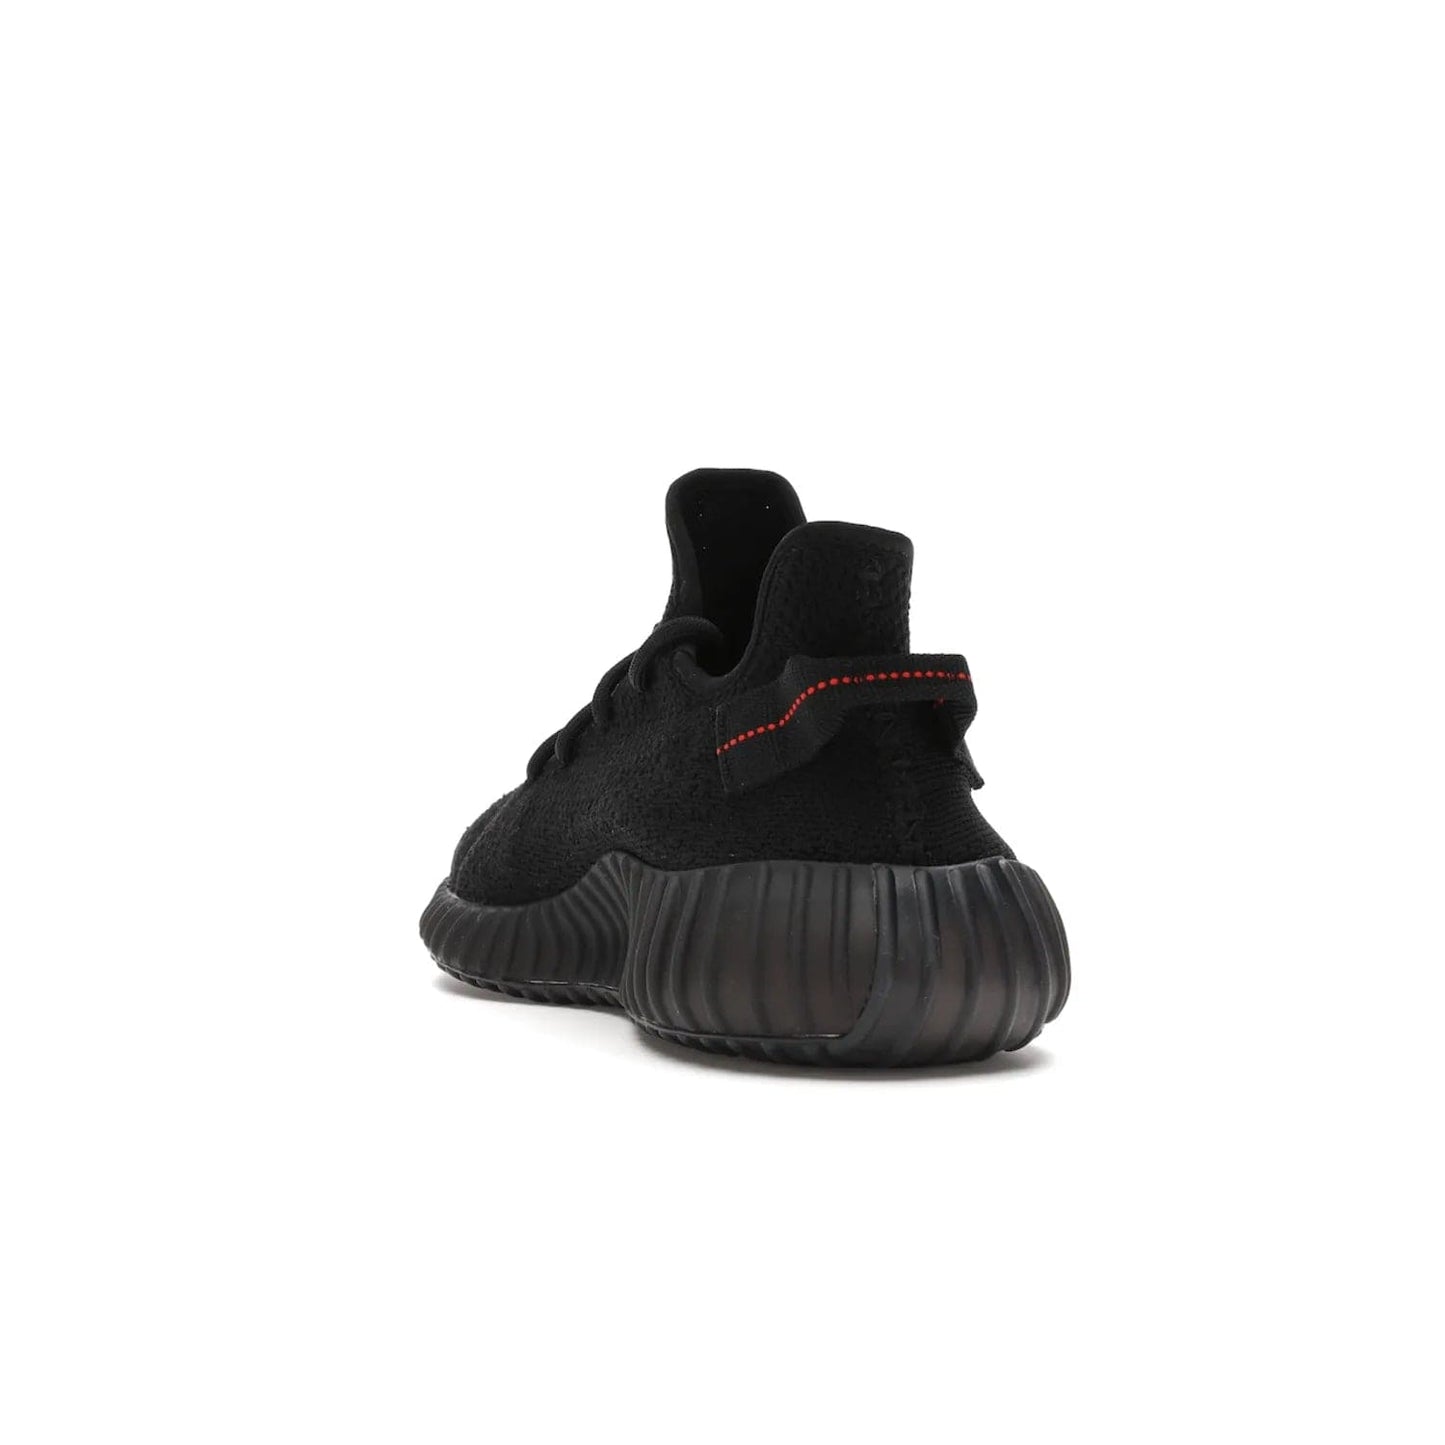 adidas Yeezy Boost 350 V2 Black Red (2017/2020) - Image 26 - Only at www.BallersClubKickz.com - Adidas Yeezy Boost 350 V2 Black Red: a classic colorway featuring black Primeknit upper, BOOST cushioning system, and iconic "SPLY-350" text. Released in 2017 for a retail price of $220.